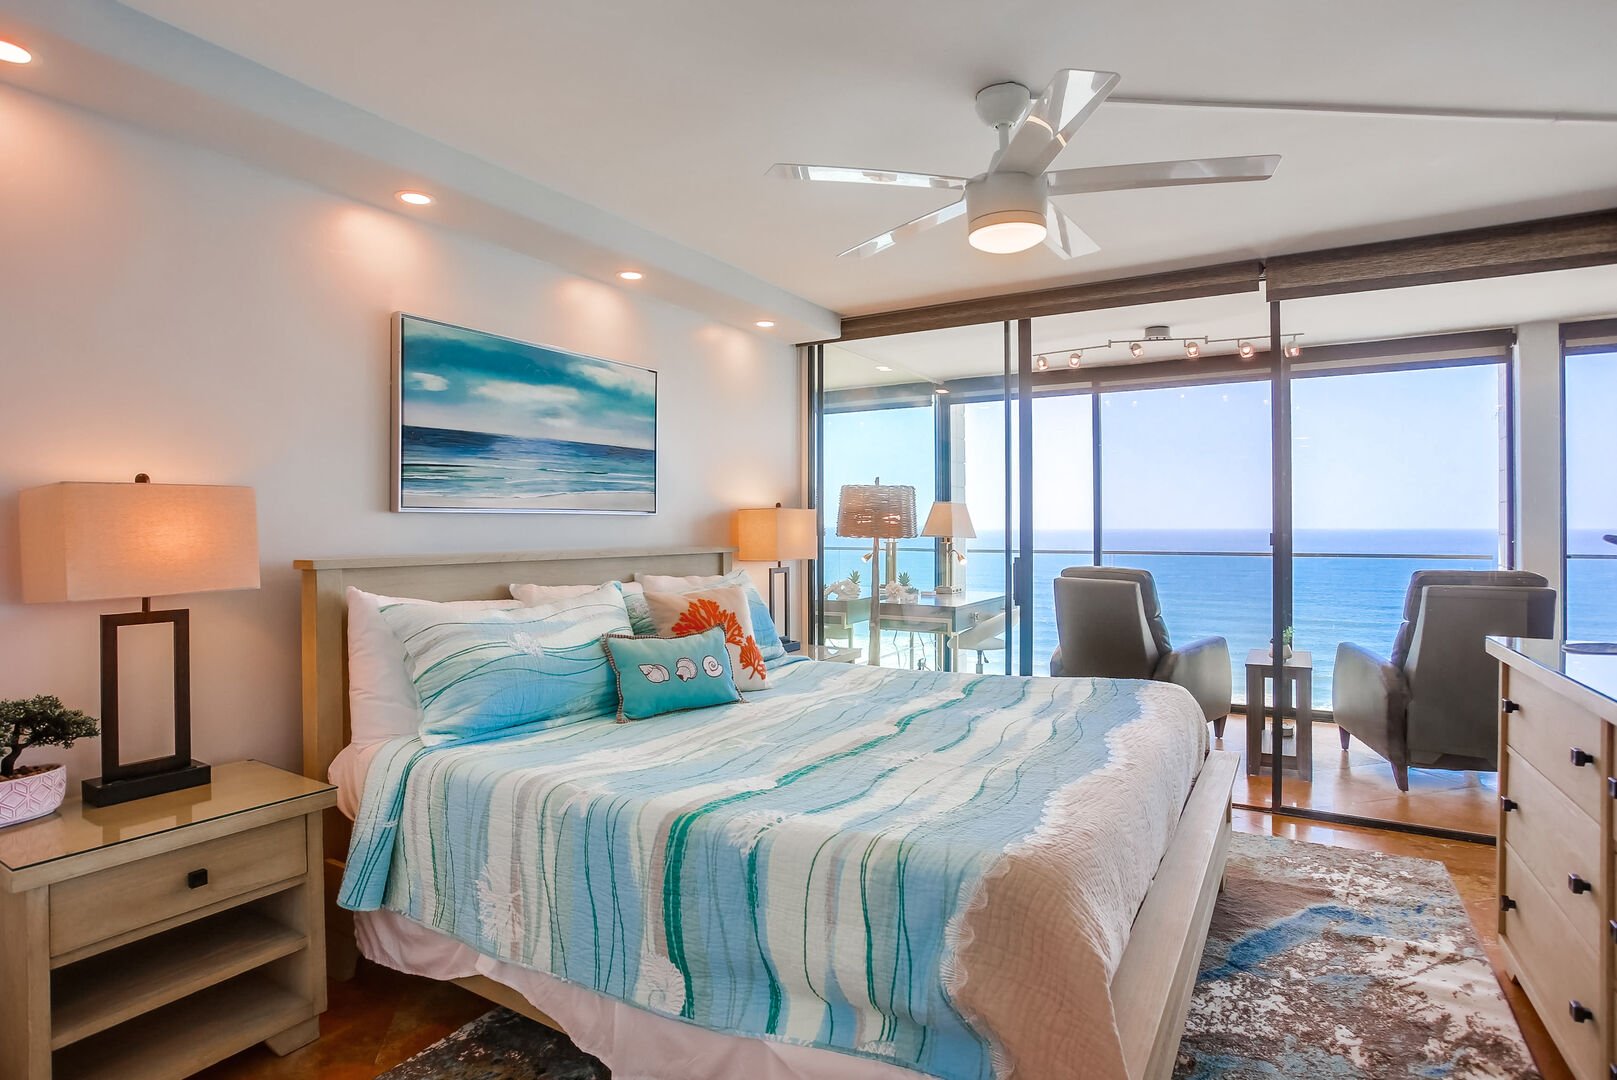 Master bedroom with king bed, ceiling fan, in-suite full bathroom, smart TV with dvr and Cable, closet and dresser storage, and incredible ocean views!